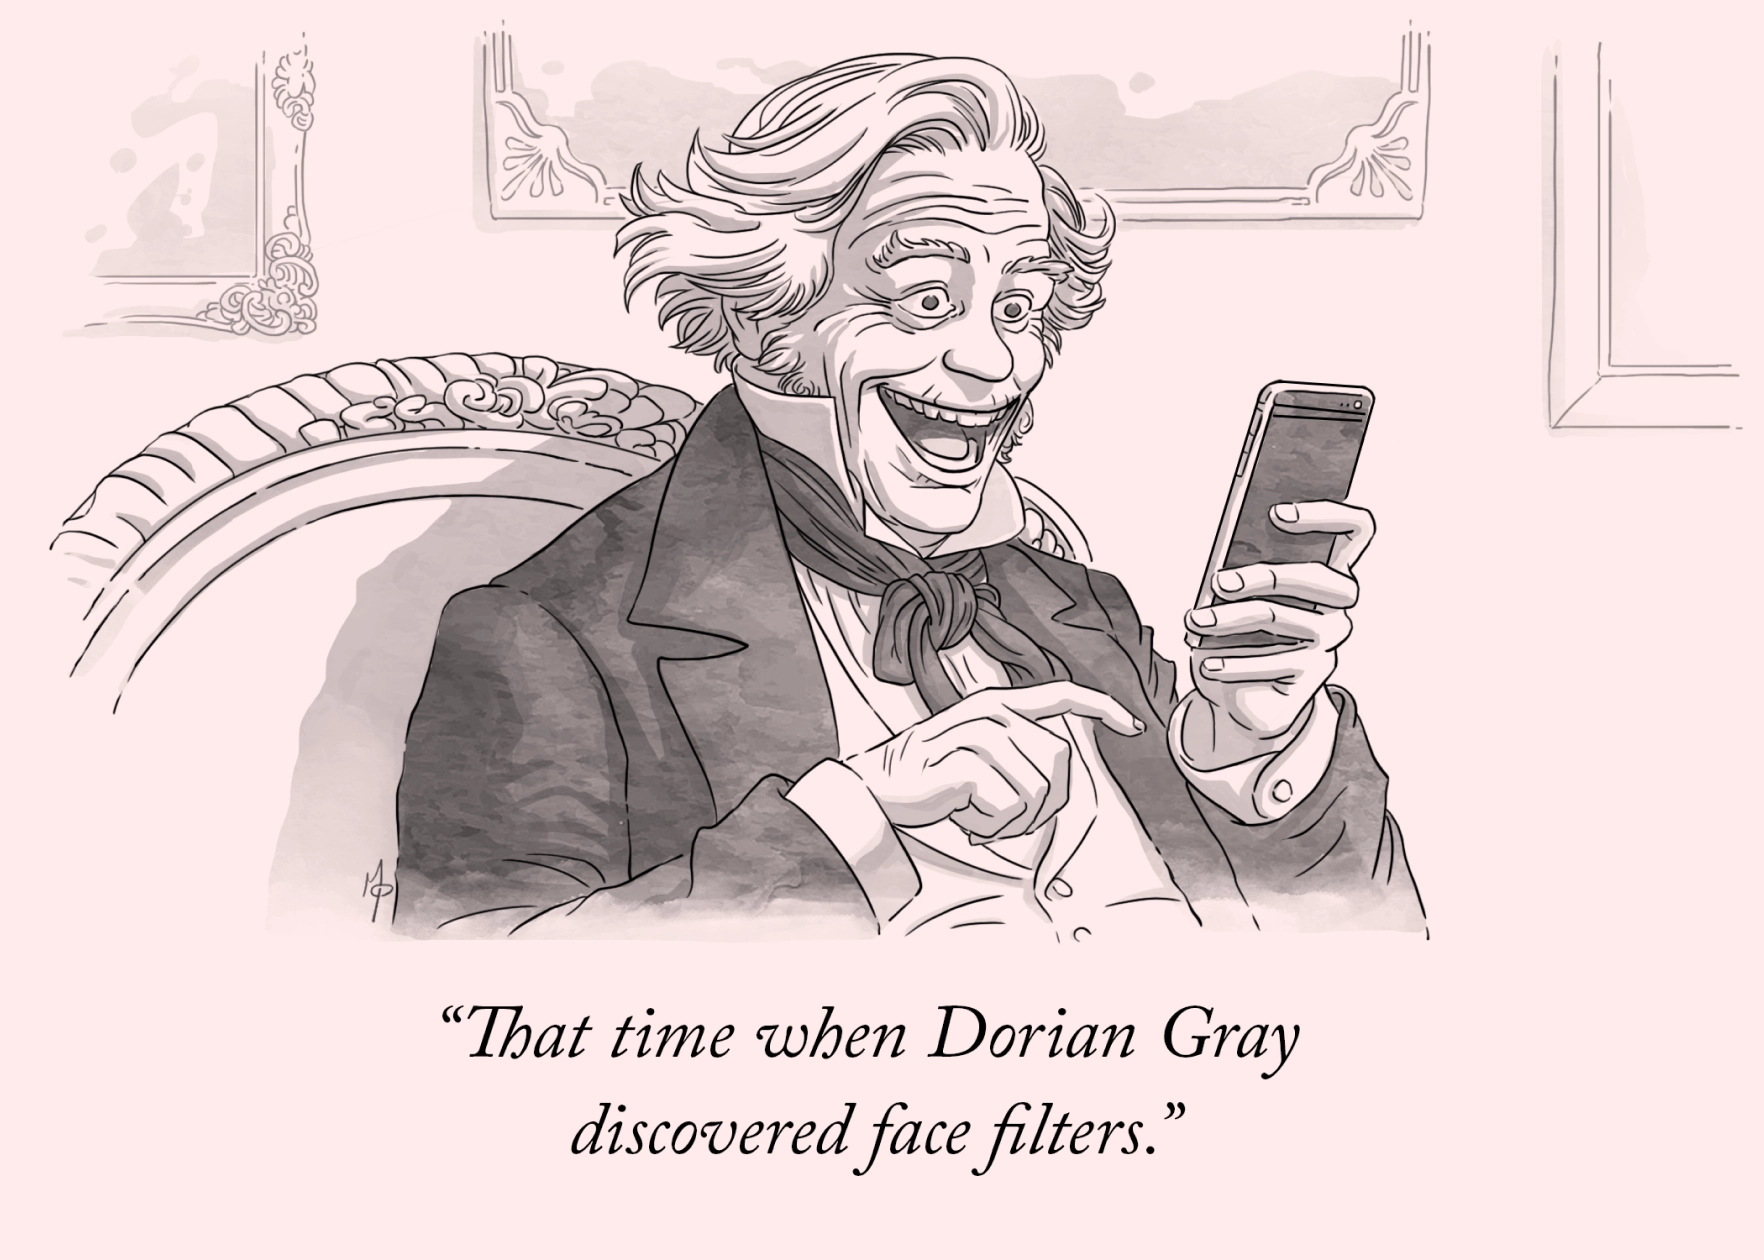 A cartoon-style illustration of an old man in victorian clothes. He's smiling broadly as he looks at a smart phone. Behind him you can see portrait painting with ornate frames. The description of the scene says, "That time when Dorian Gray discoverd face filters."